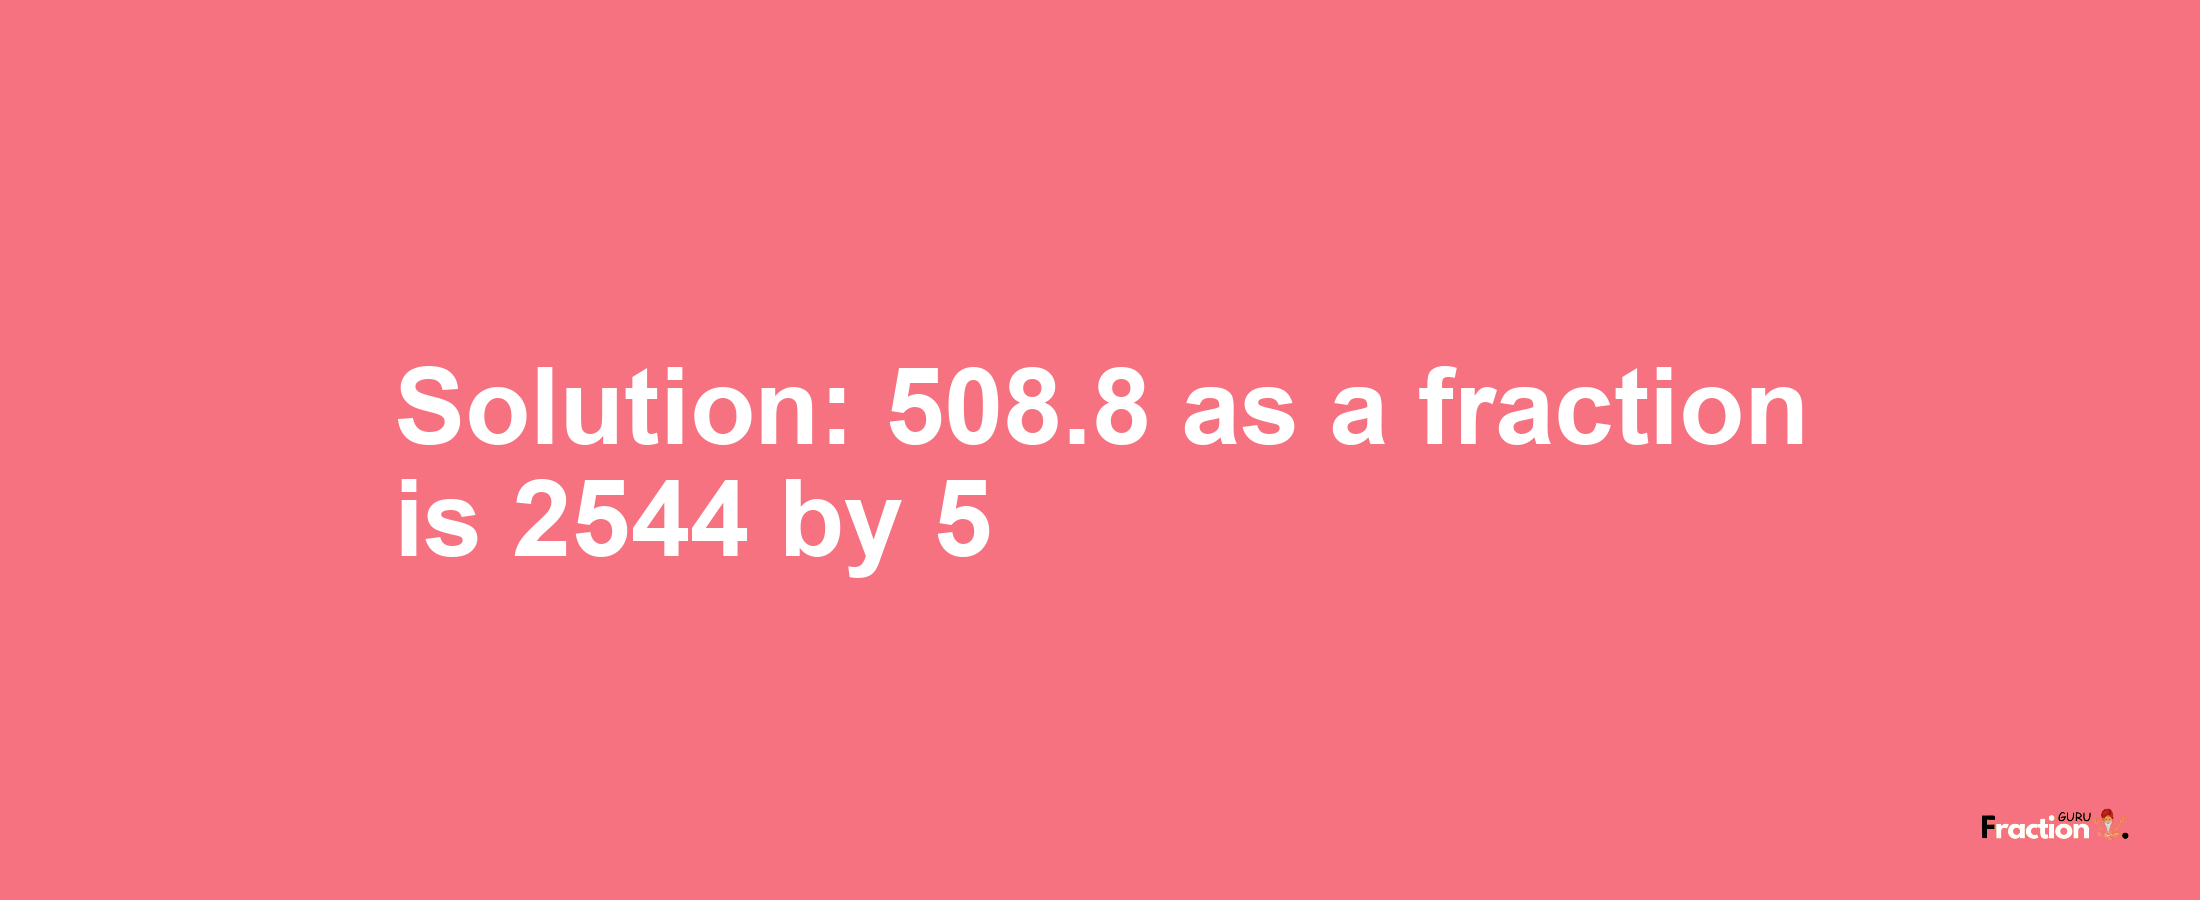 Solution:508.8 as a fraction is 2544/5